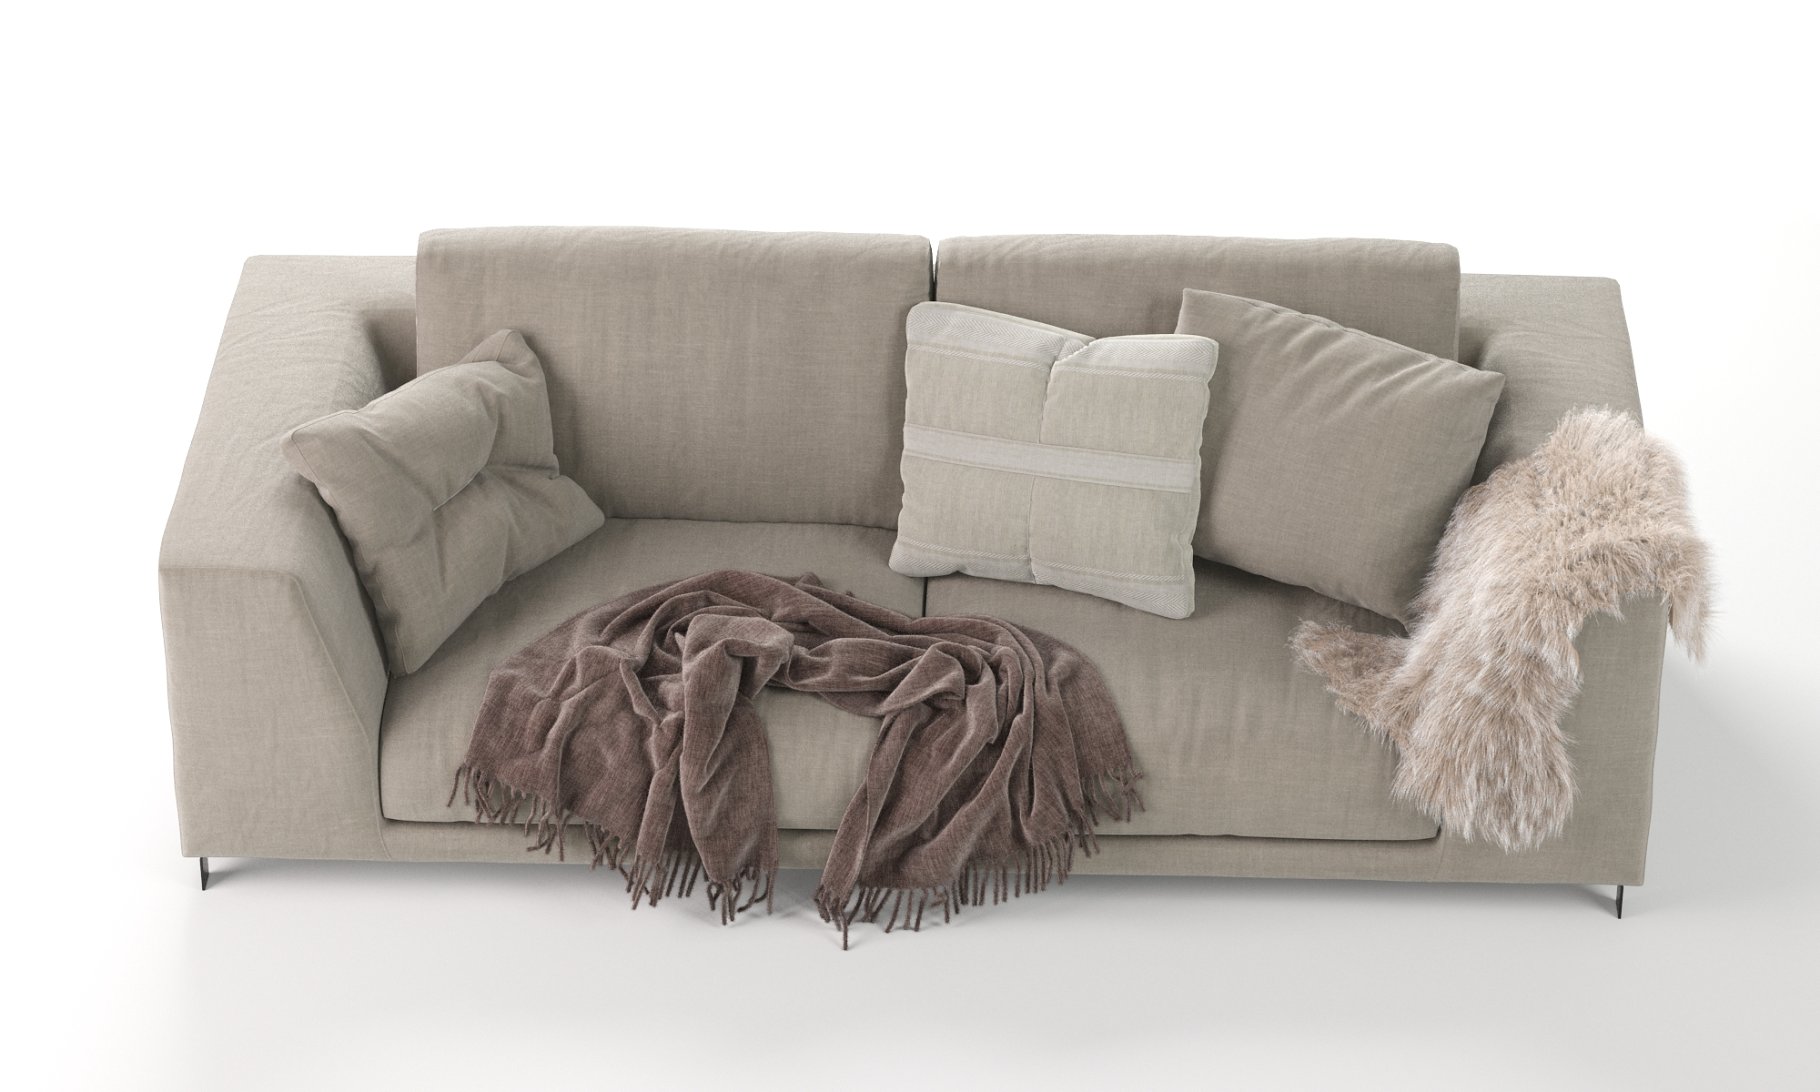 Rendering of an irresistible 3d model of a sofa